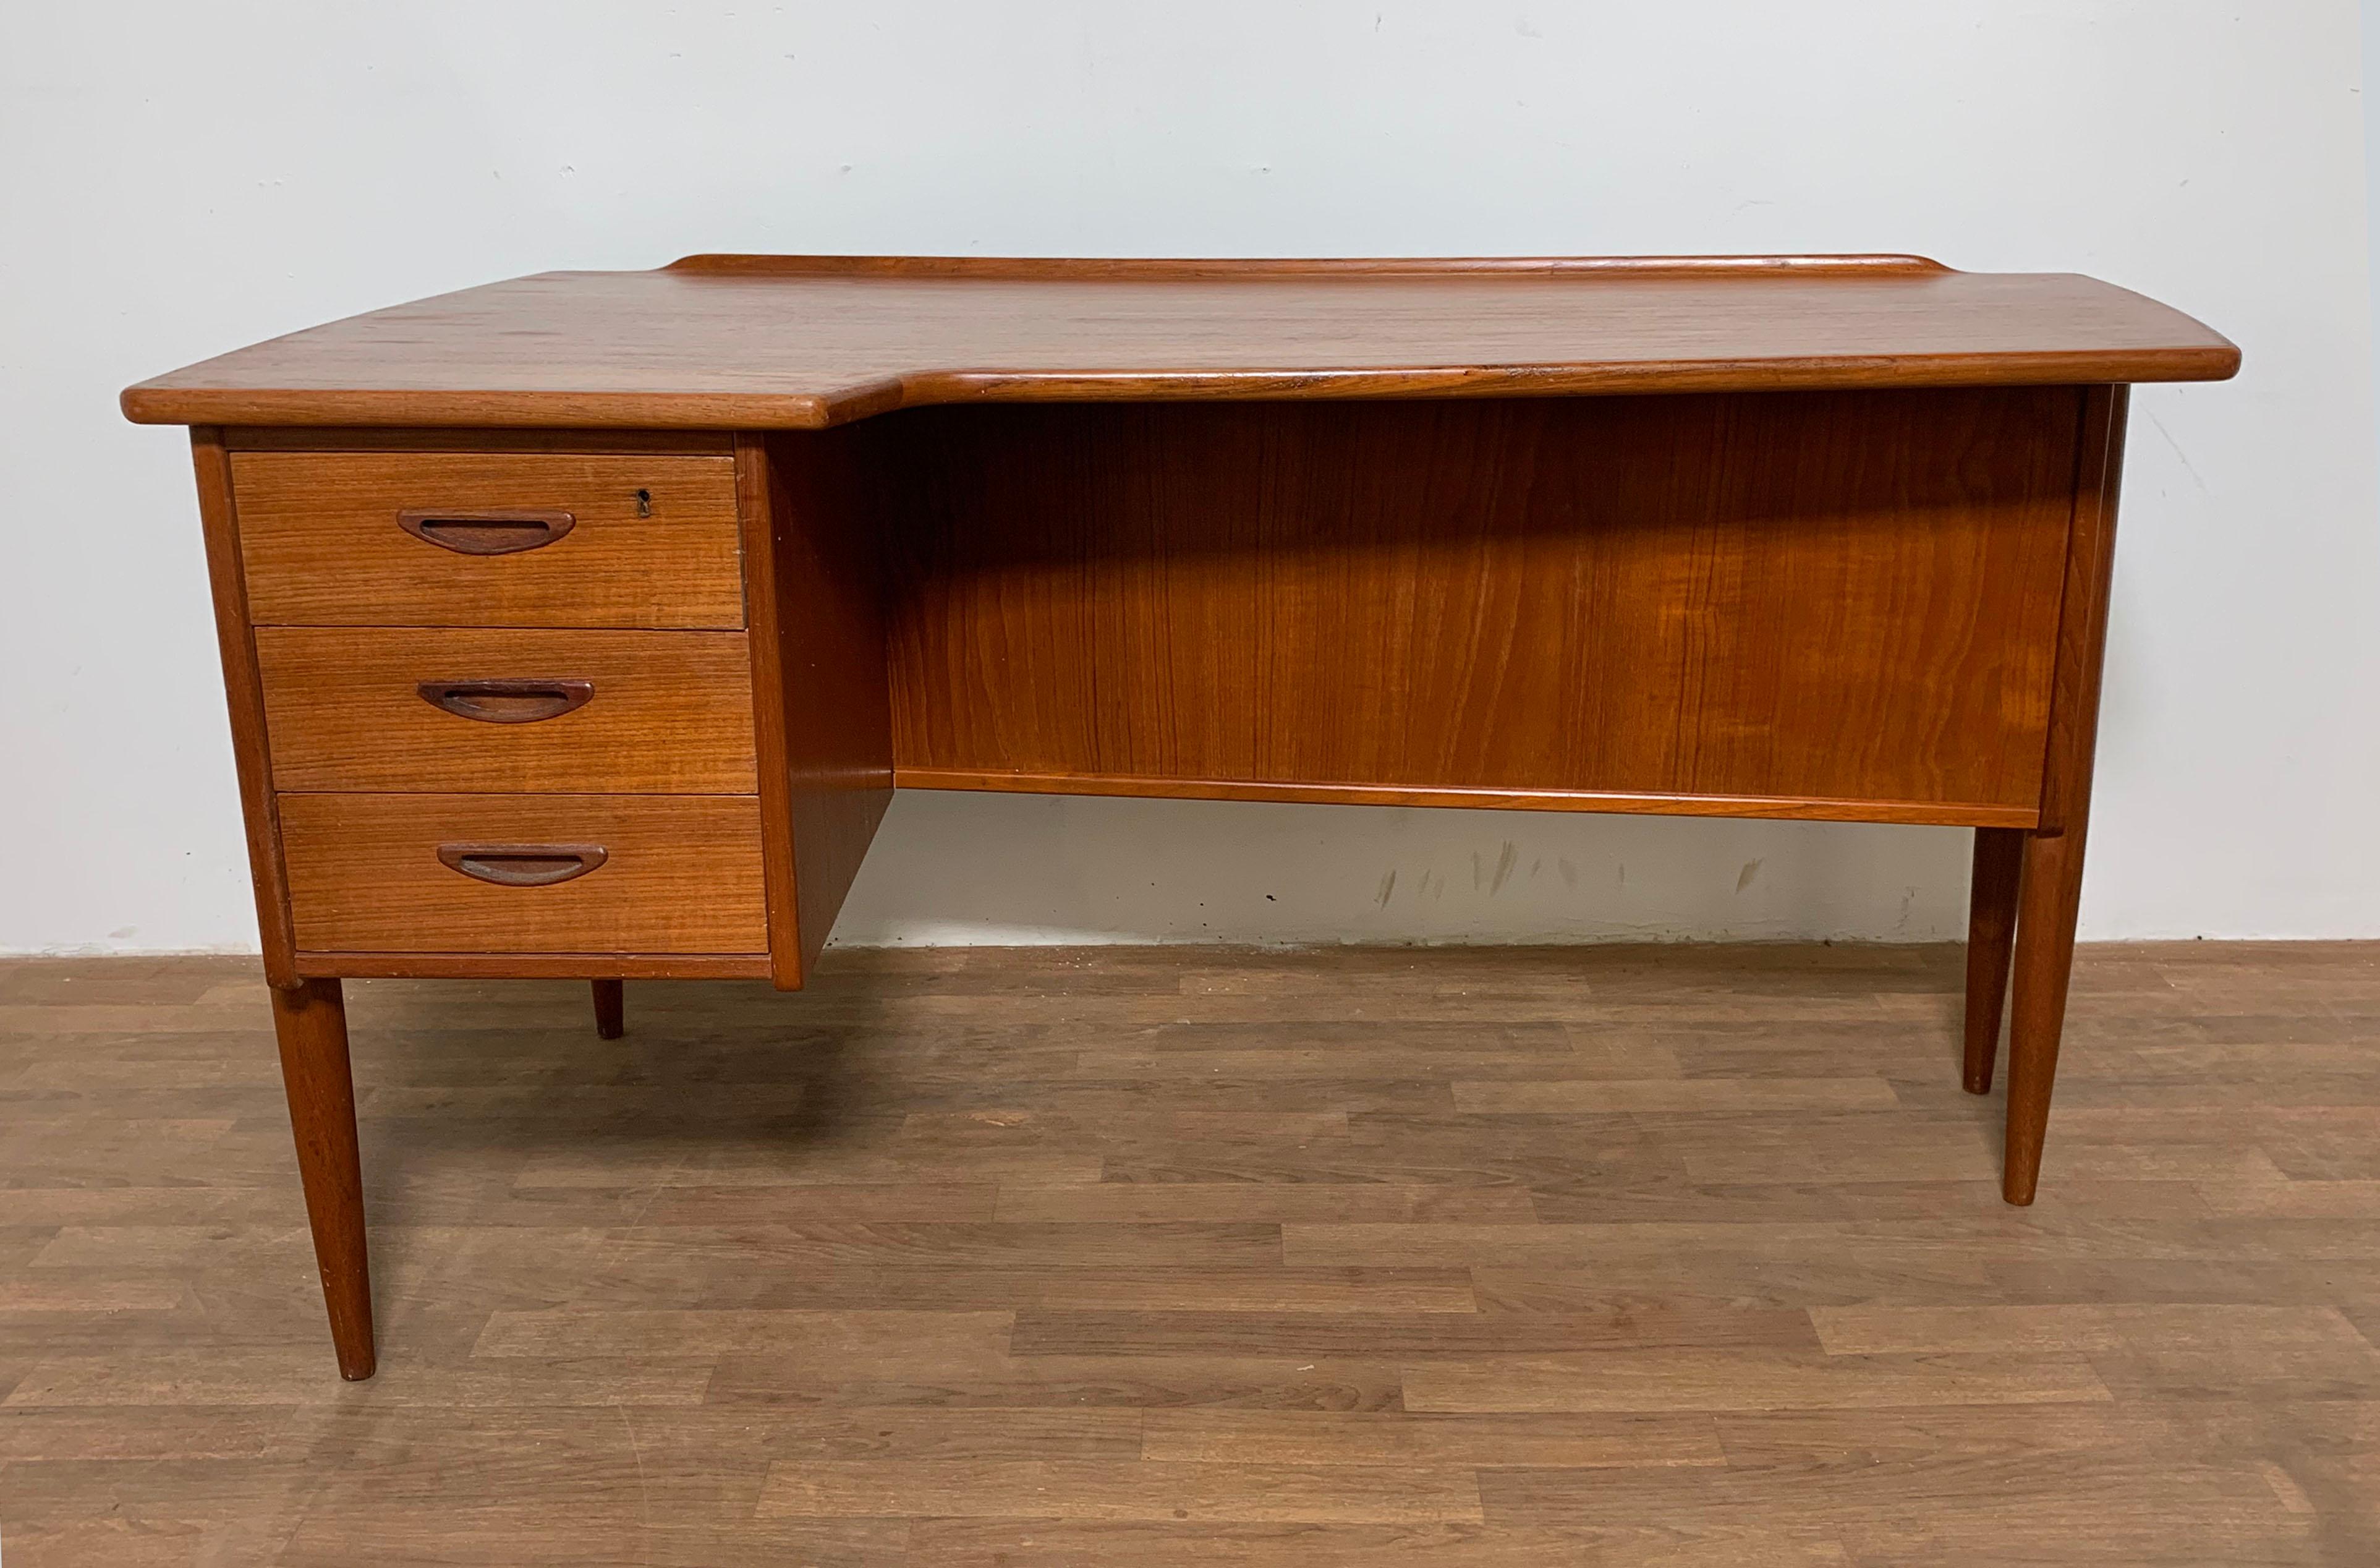 Teak desk with an asymmetrical top designed by Göran Strand for Lelångs Möbelfabrik, Sweden in the 1960s. Features a bookcase back and locked drop down storage area. Measures 29